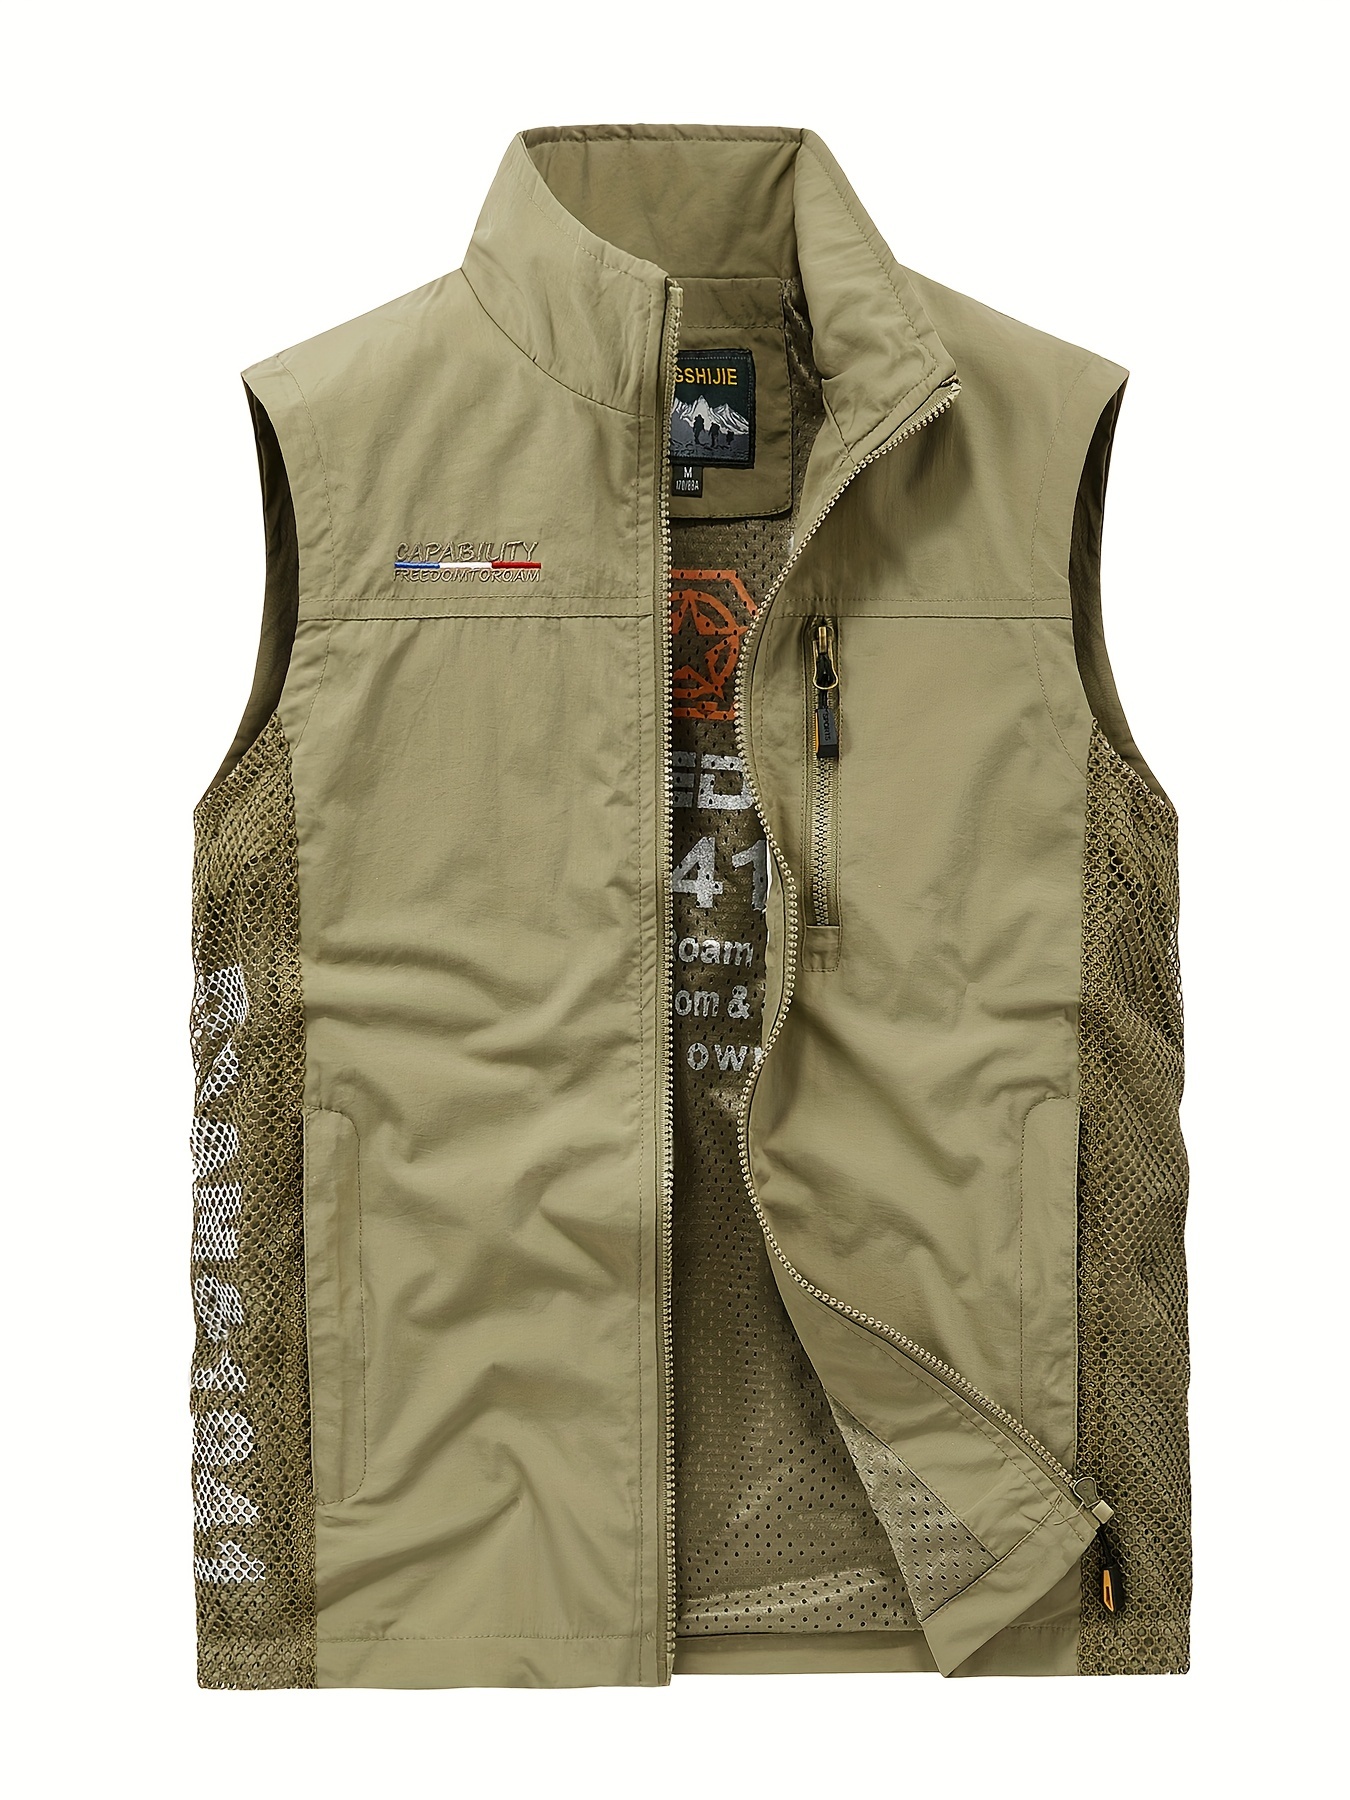 zipper pockets cargo vest mens casual outwear stand collar zip up vest for outdoor fishing photography